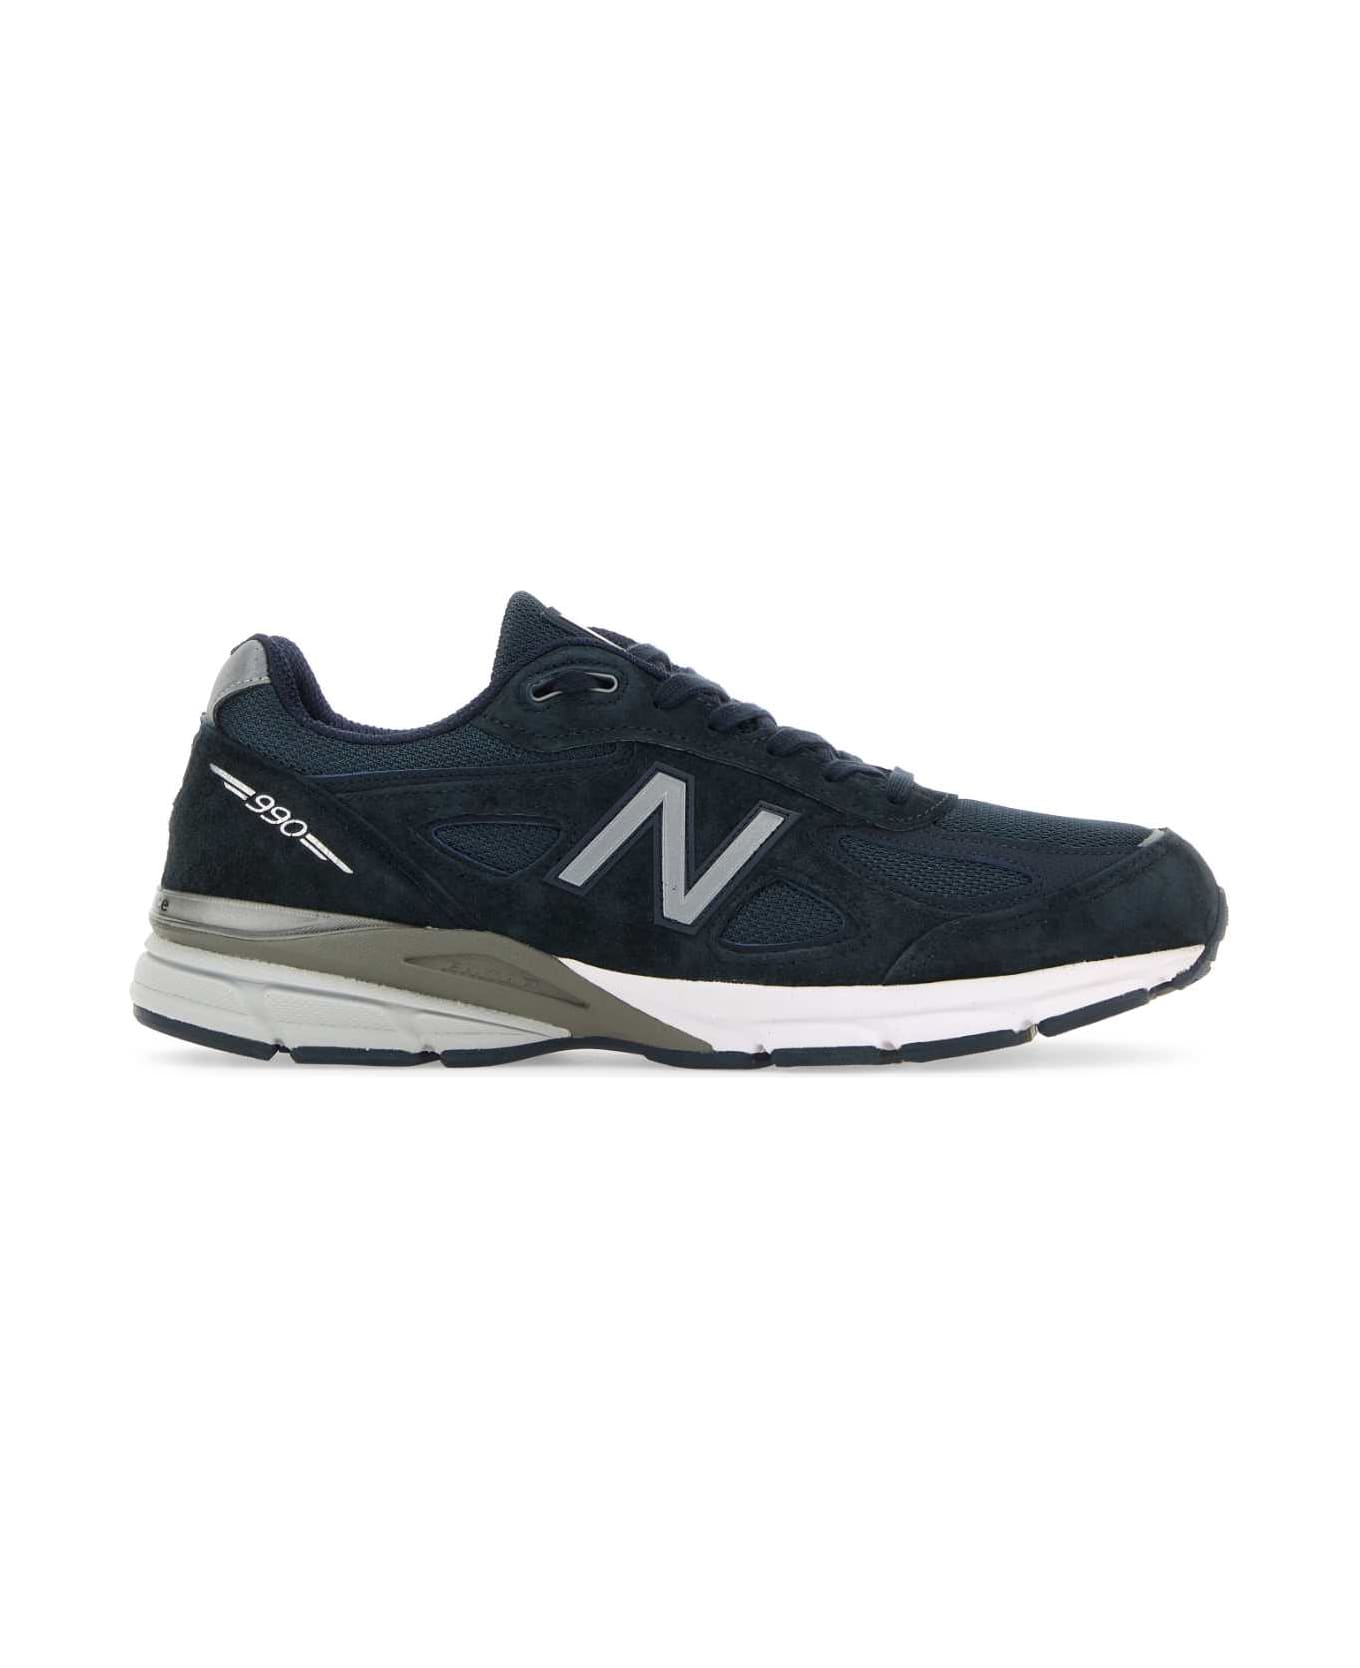 New Balance Blue Fabric And Suede 990v4 Sneakers - NAVY